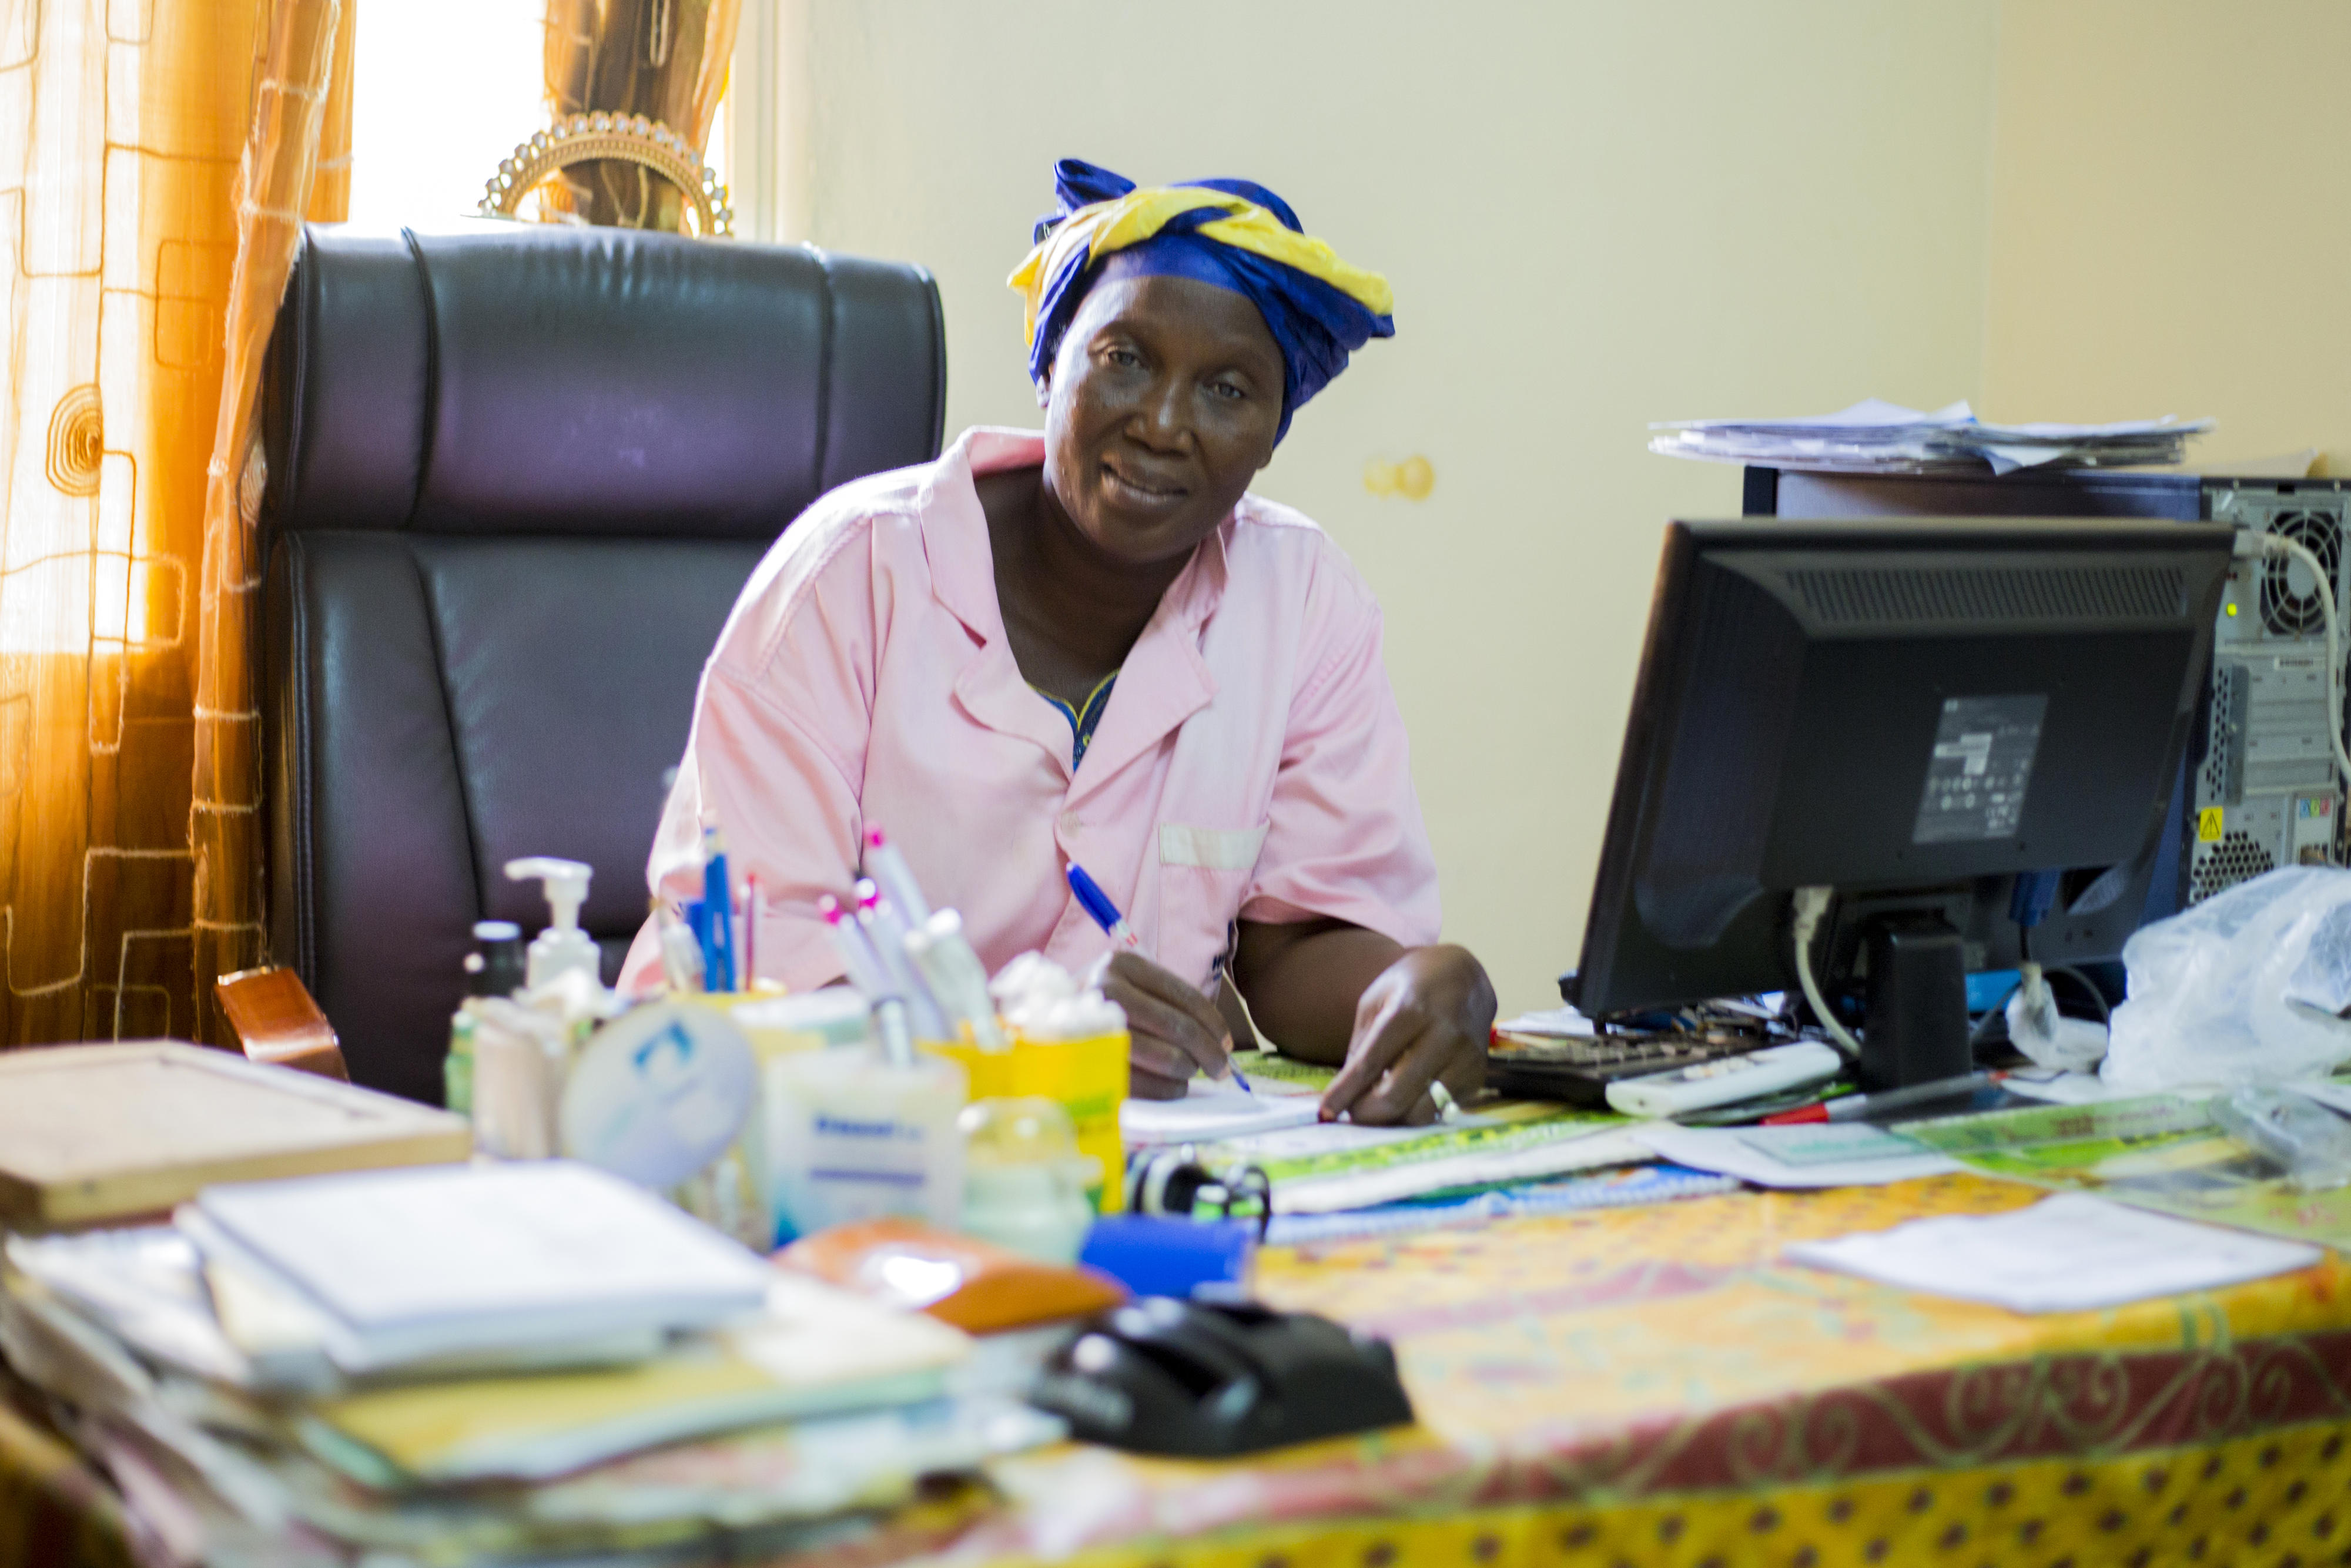 Symbolic image: A midwife works at her desk